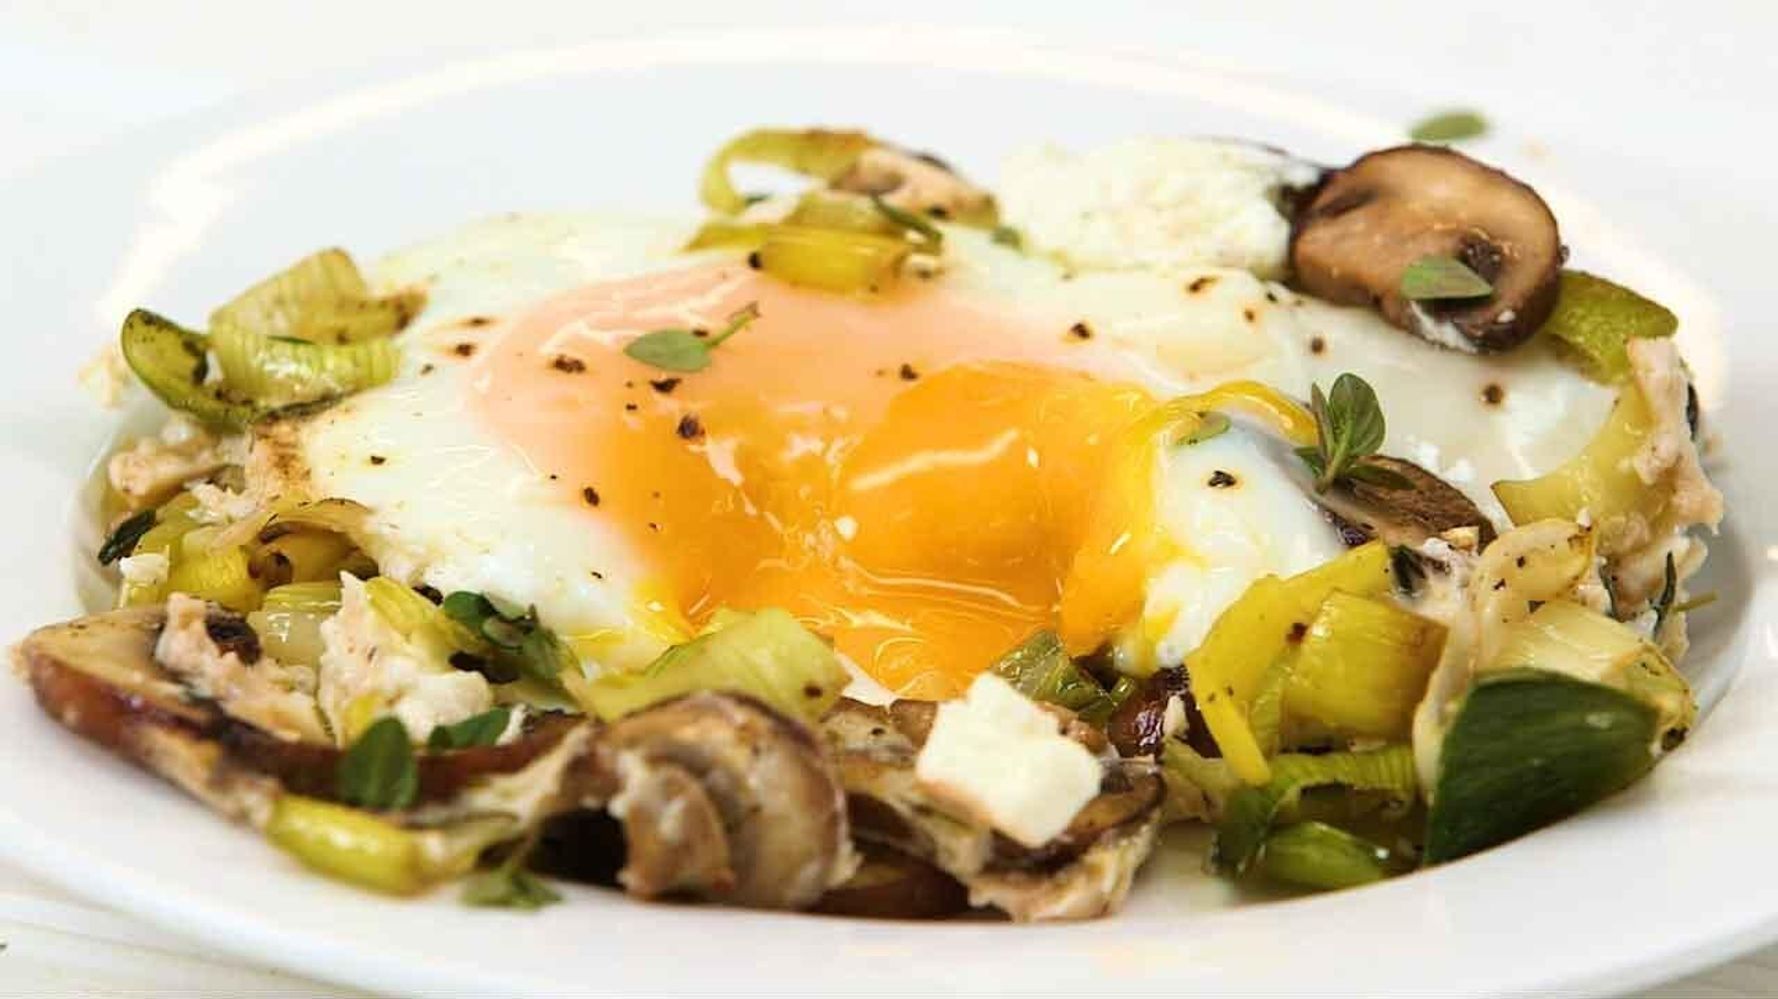 Watch How To Make Baked Eggs With Mushroom And Leeks Huffpost Australia Food And Drink